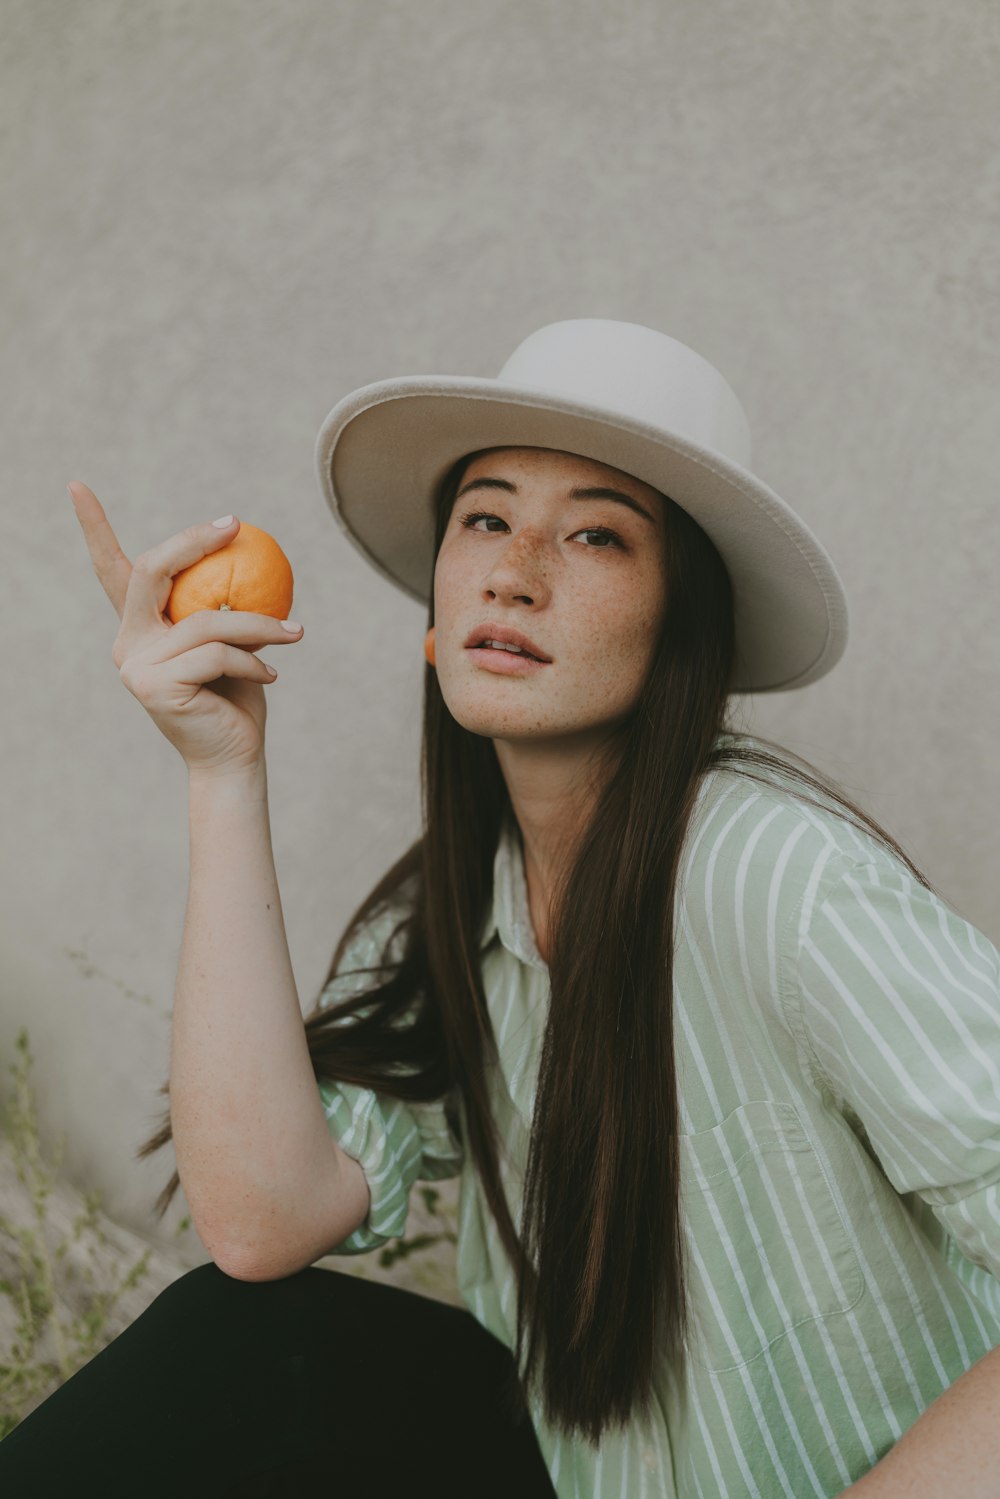 a person wearing a hat and holding a carrot